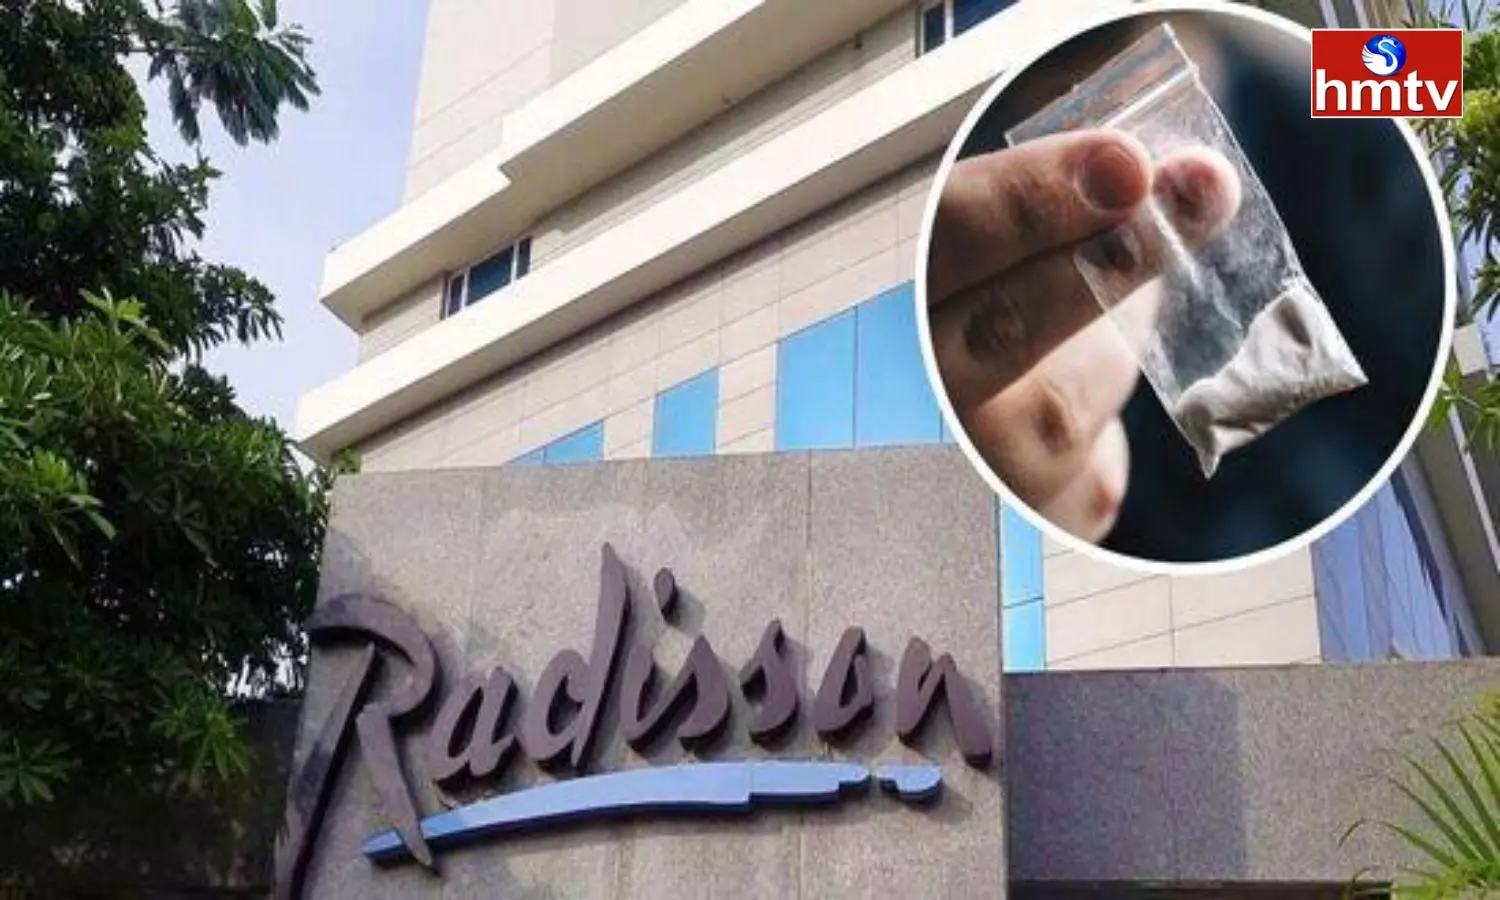 Hyderabad Crime News In Telugu Ts Police Burn Drugs Party In Radisson Hotel Arrested Bjp Leader Son